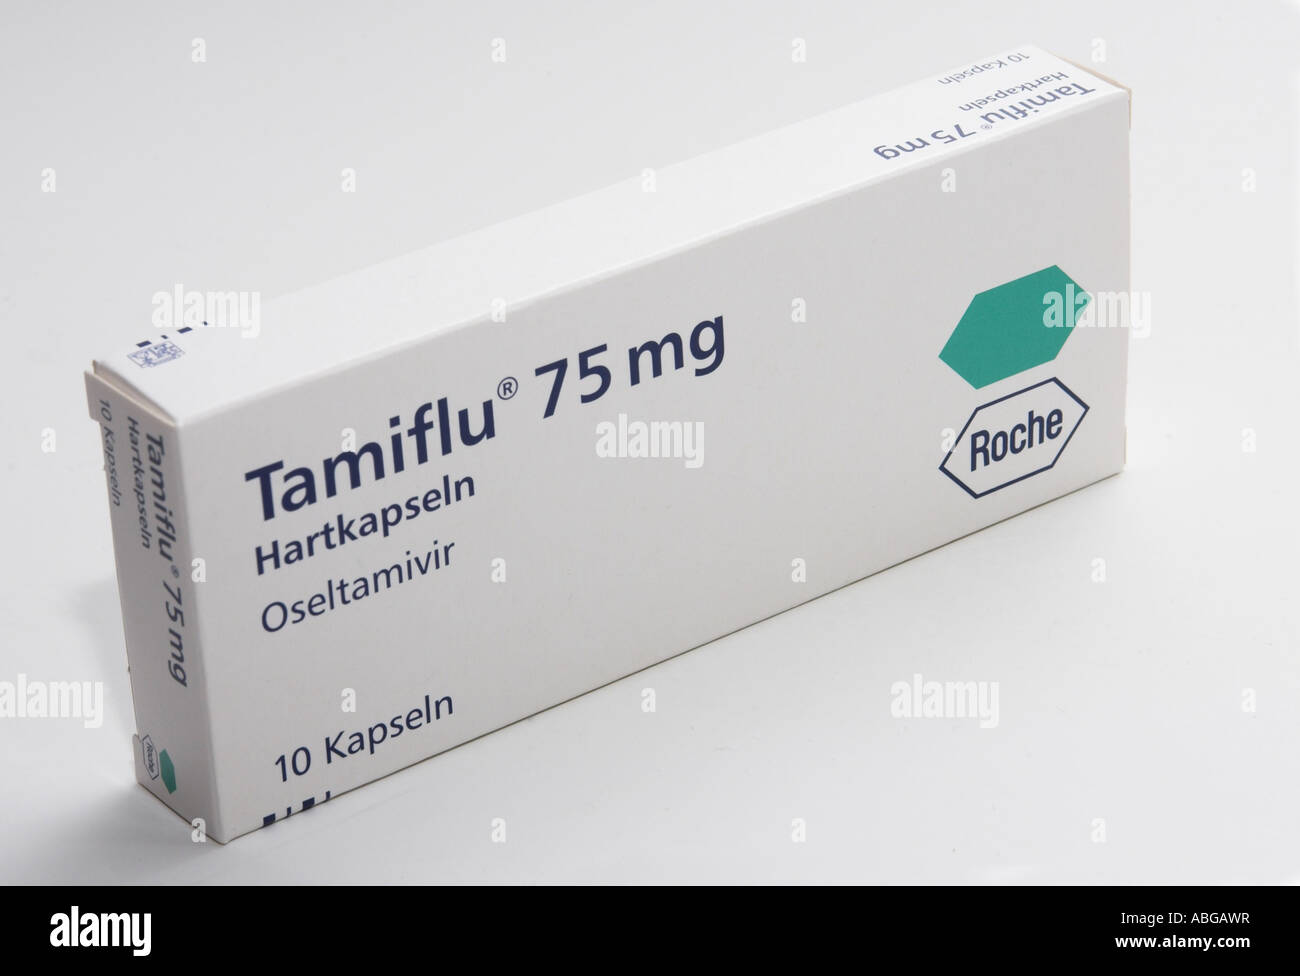 Tamiflu flu medicament from the Swiss company Roche Stock Photo